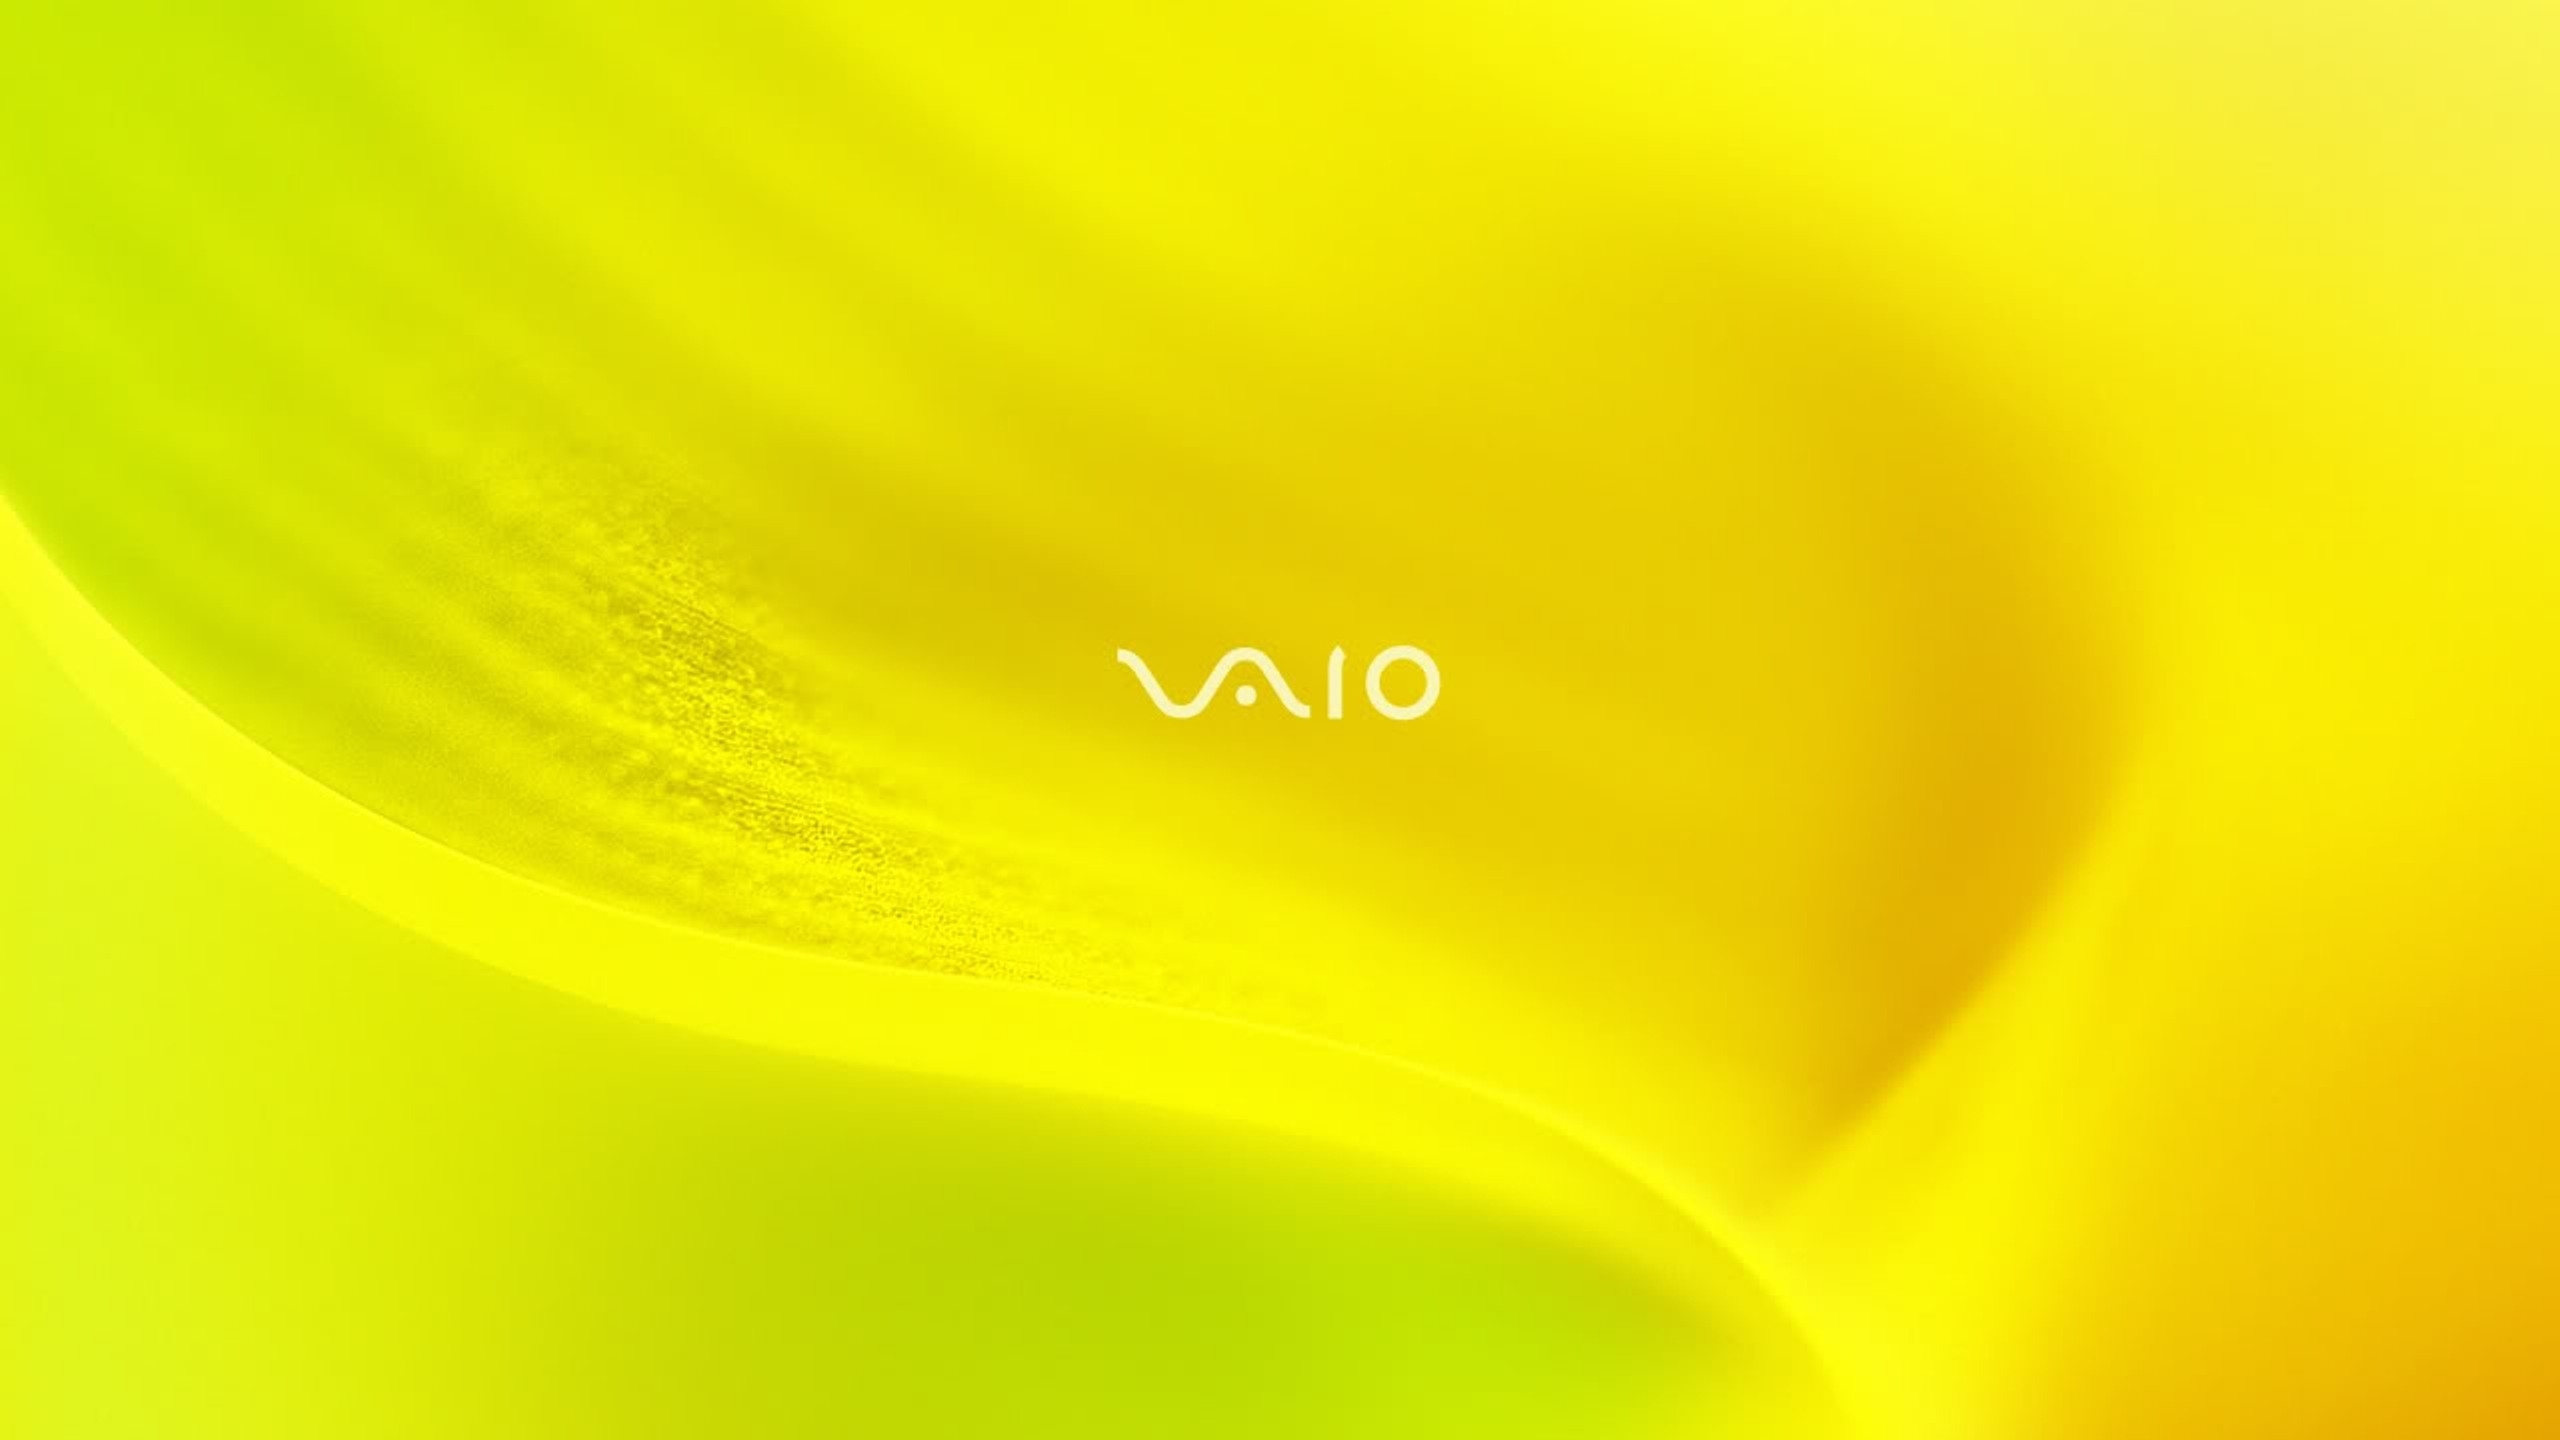 2560x1440 Sony Vaio Yellow System 1440p Resolution Wallpaper Hd Hi Tech 4k Wallpapers Images Photos And Background